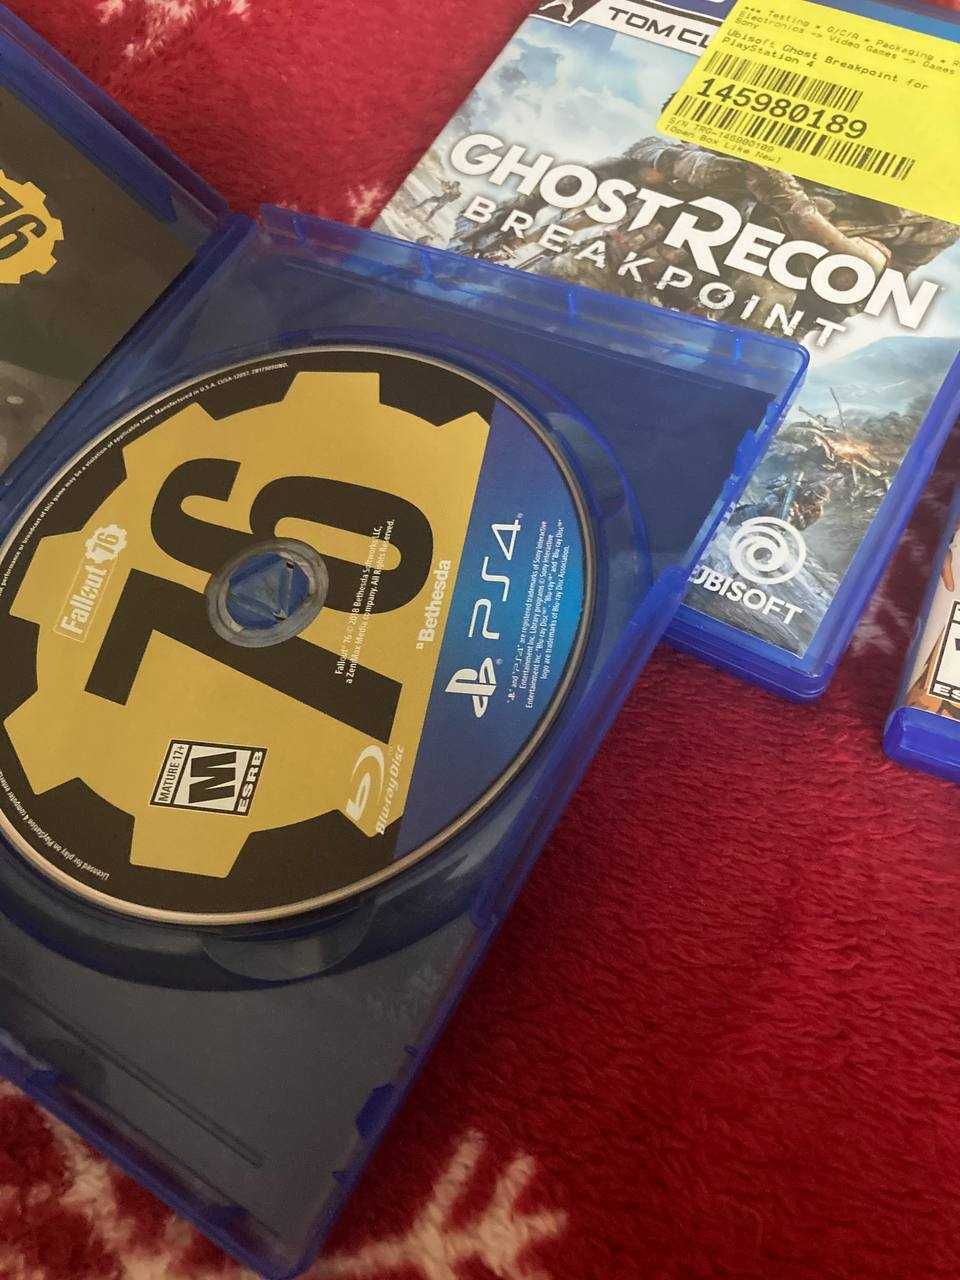 Всі диски ps4. sims. fallout. ghost recon.